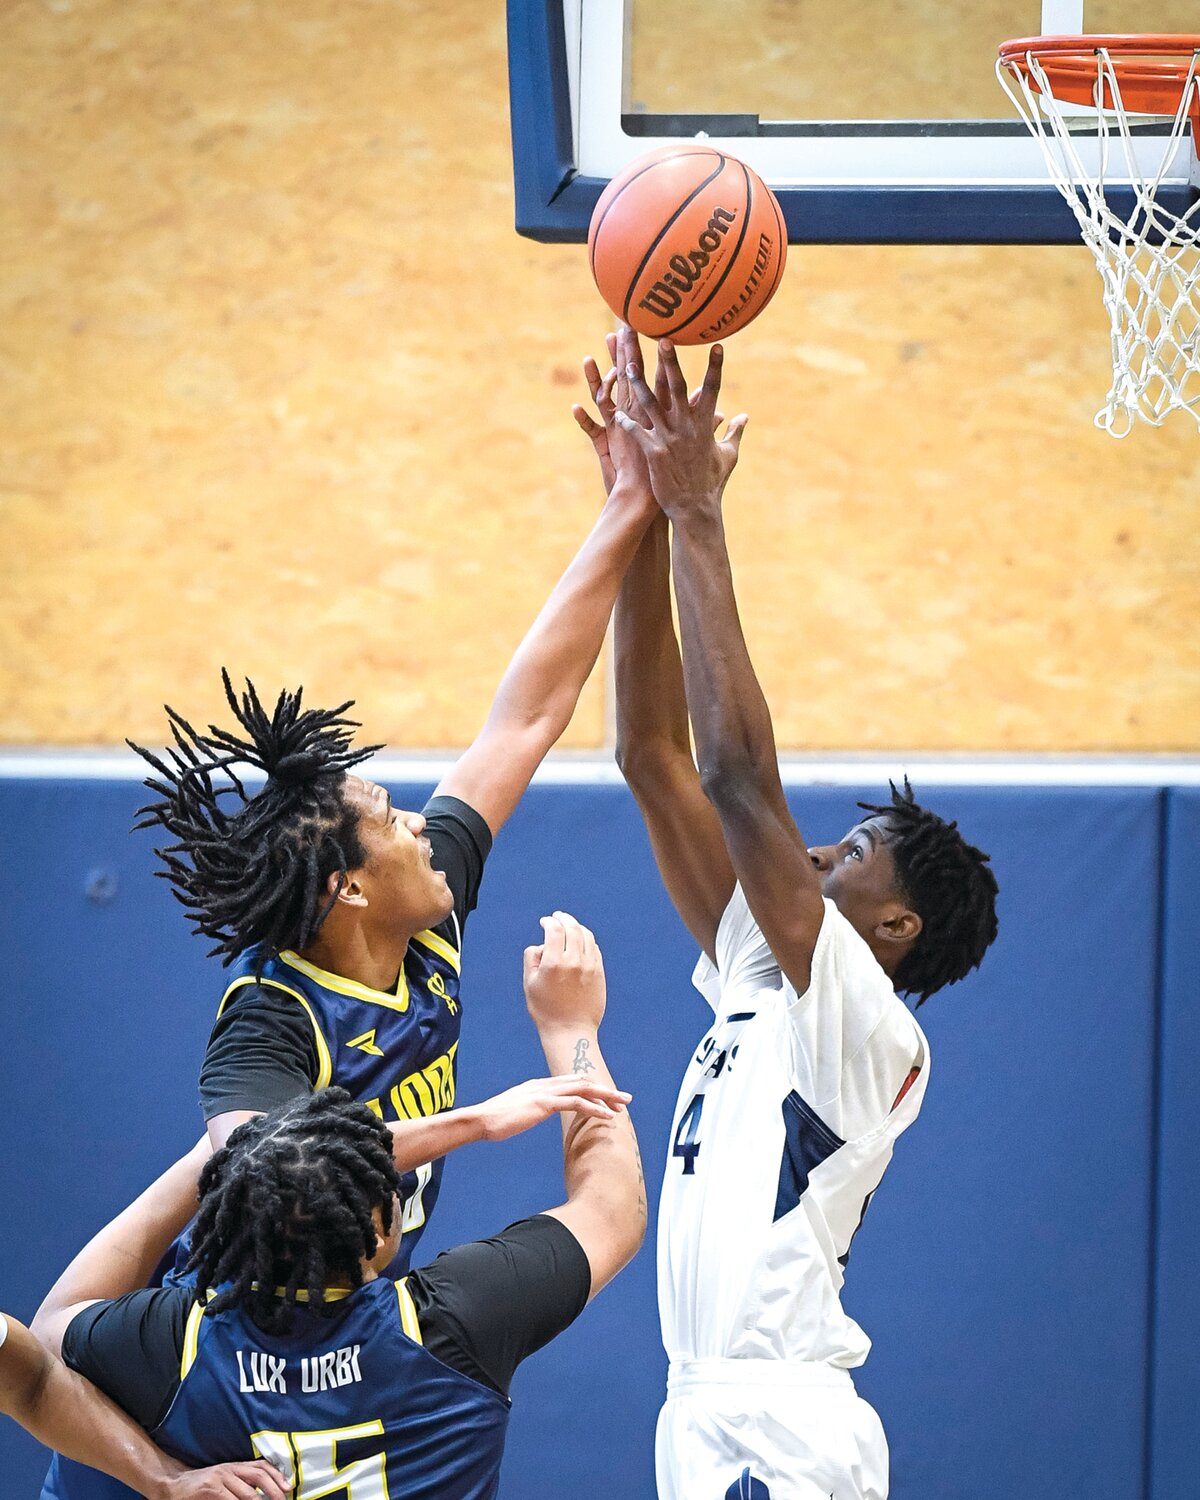 Solebury School’s Messiah Barton beats The City School’s Shawn Murphy to a rebound in the first half.